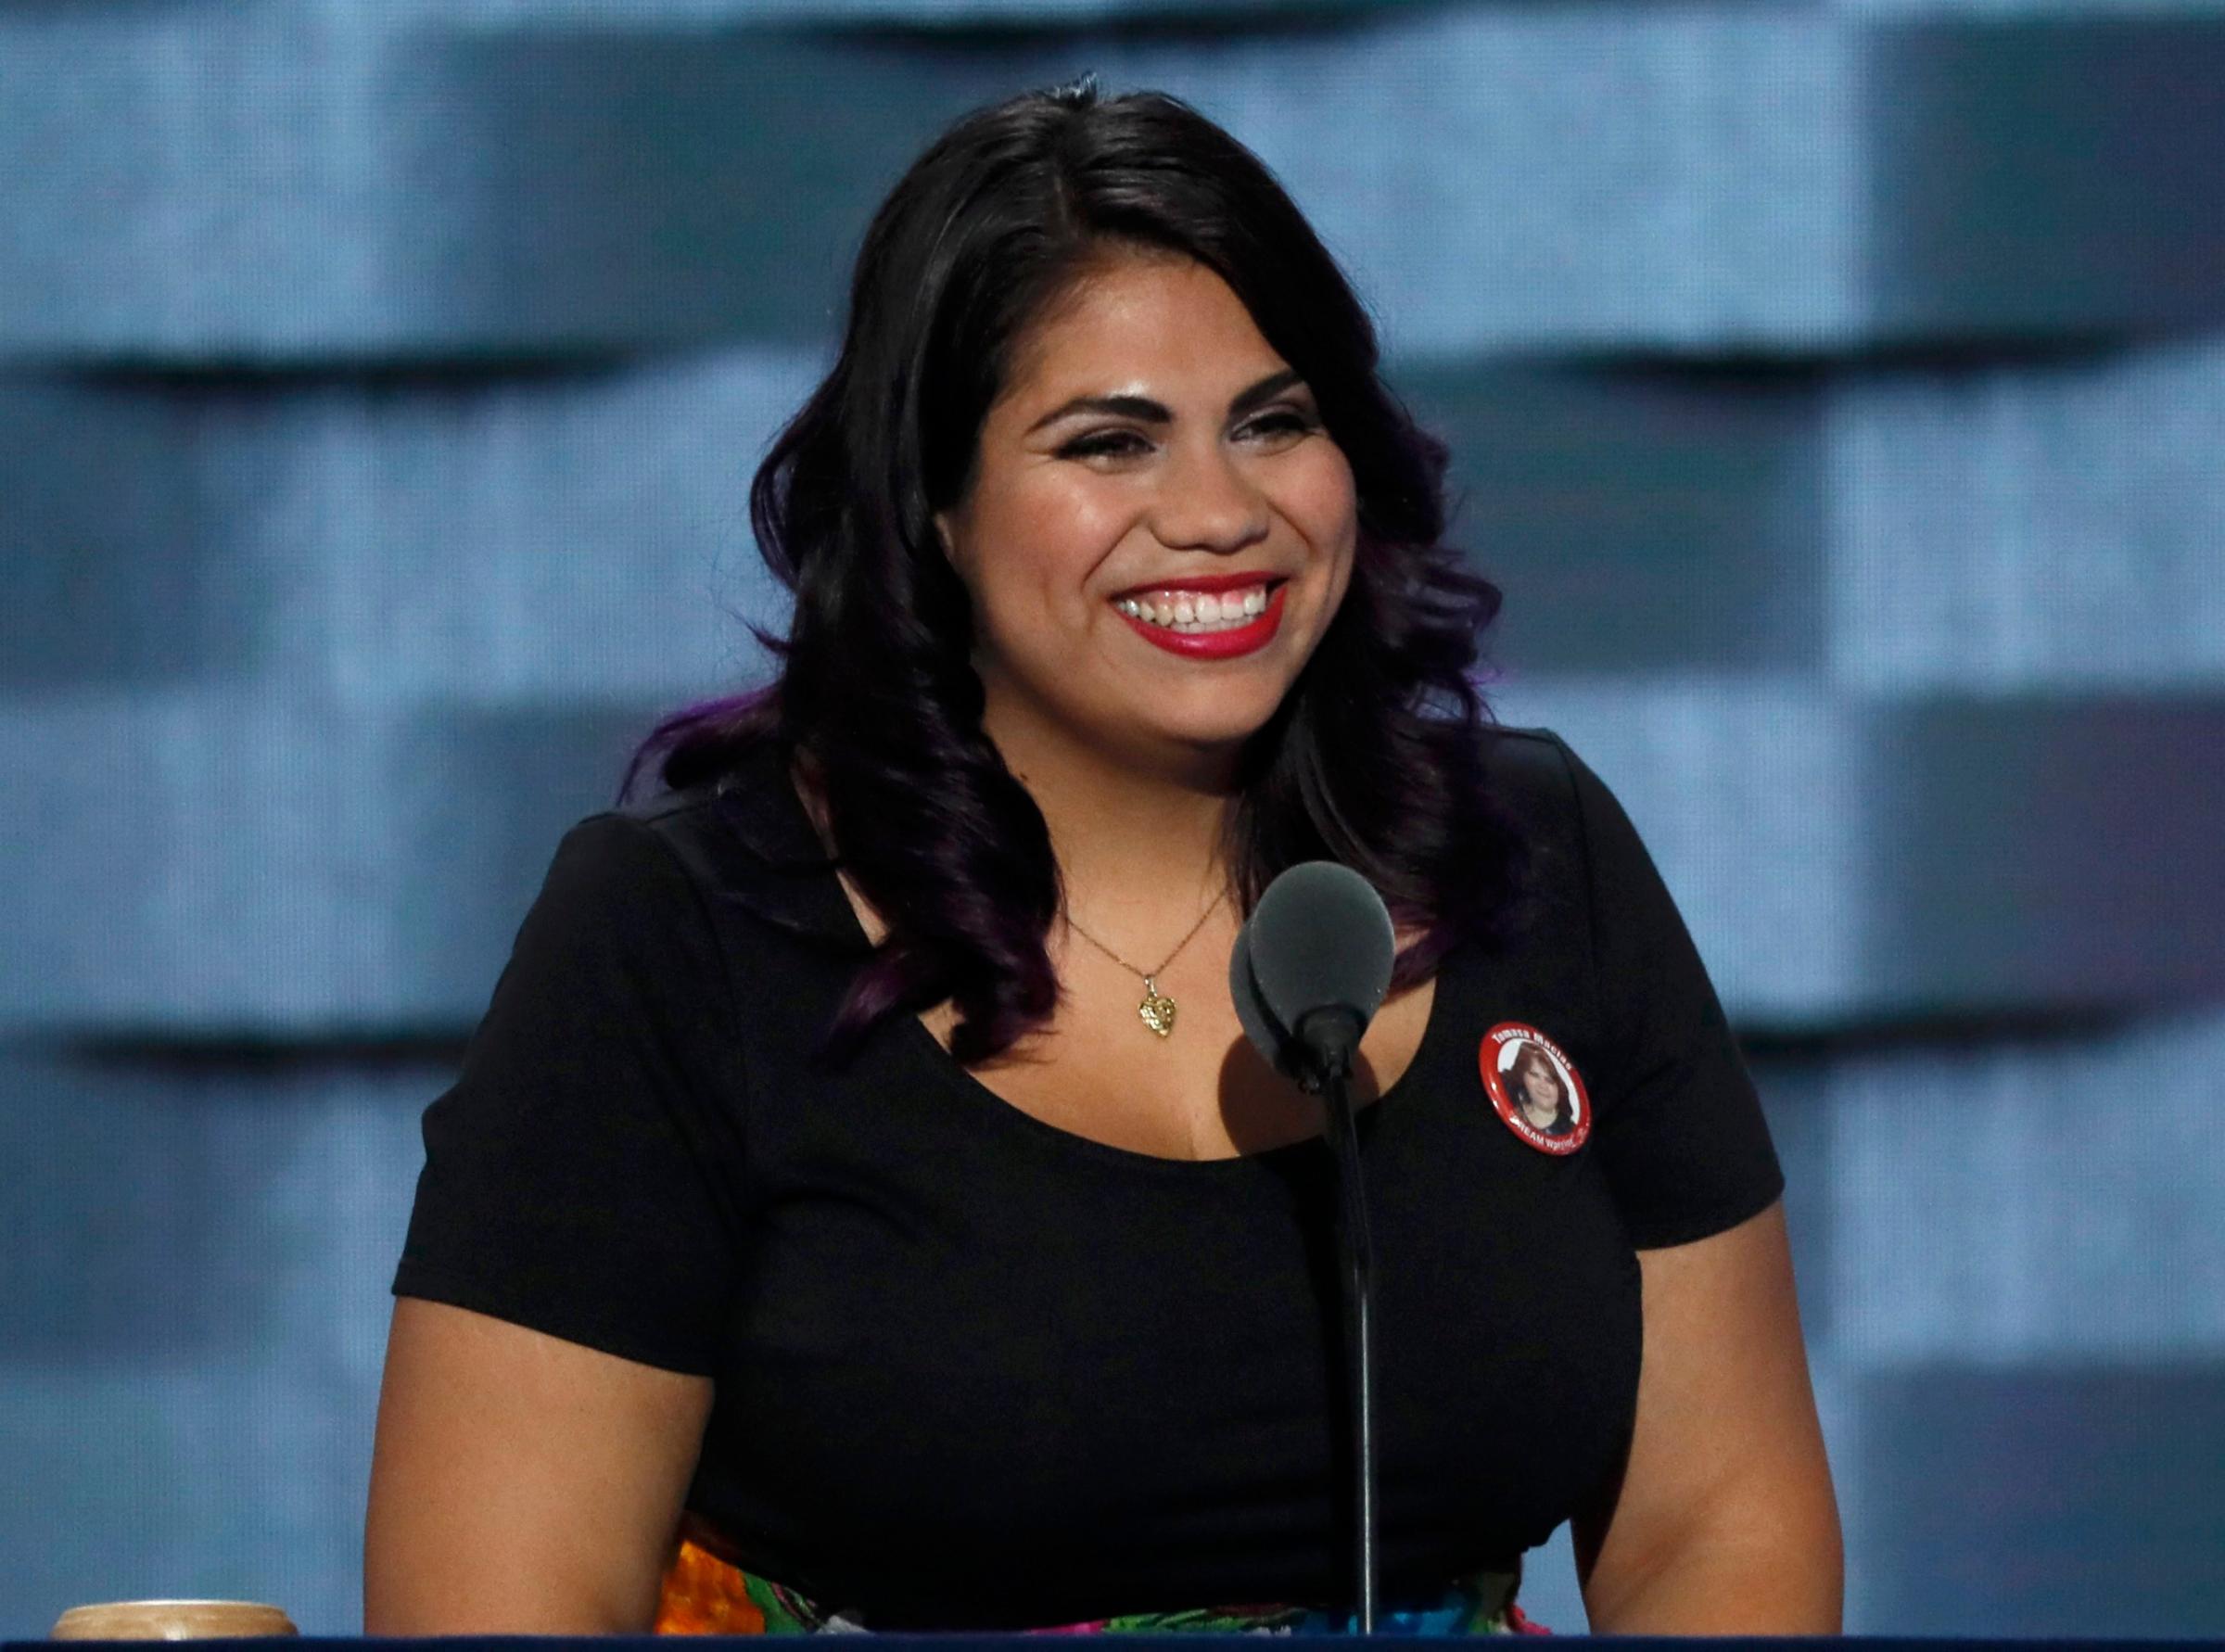 Immigration advocate Astrid Silva speaks at the Democratic National Convention in Philadelphia